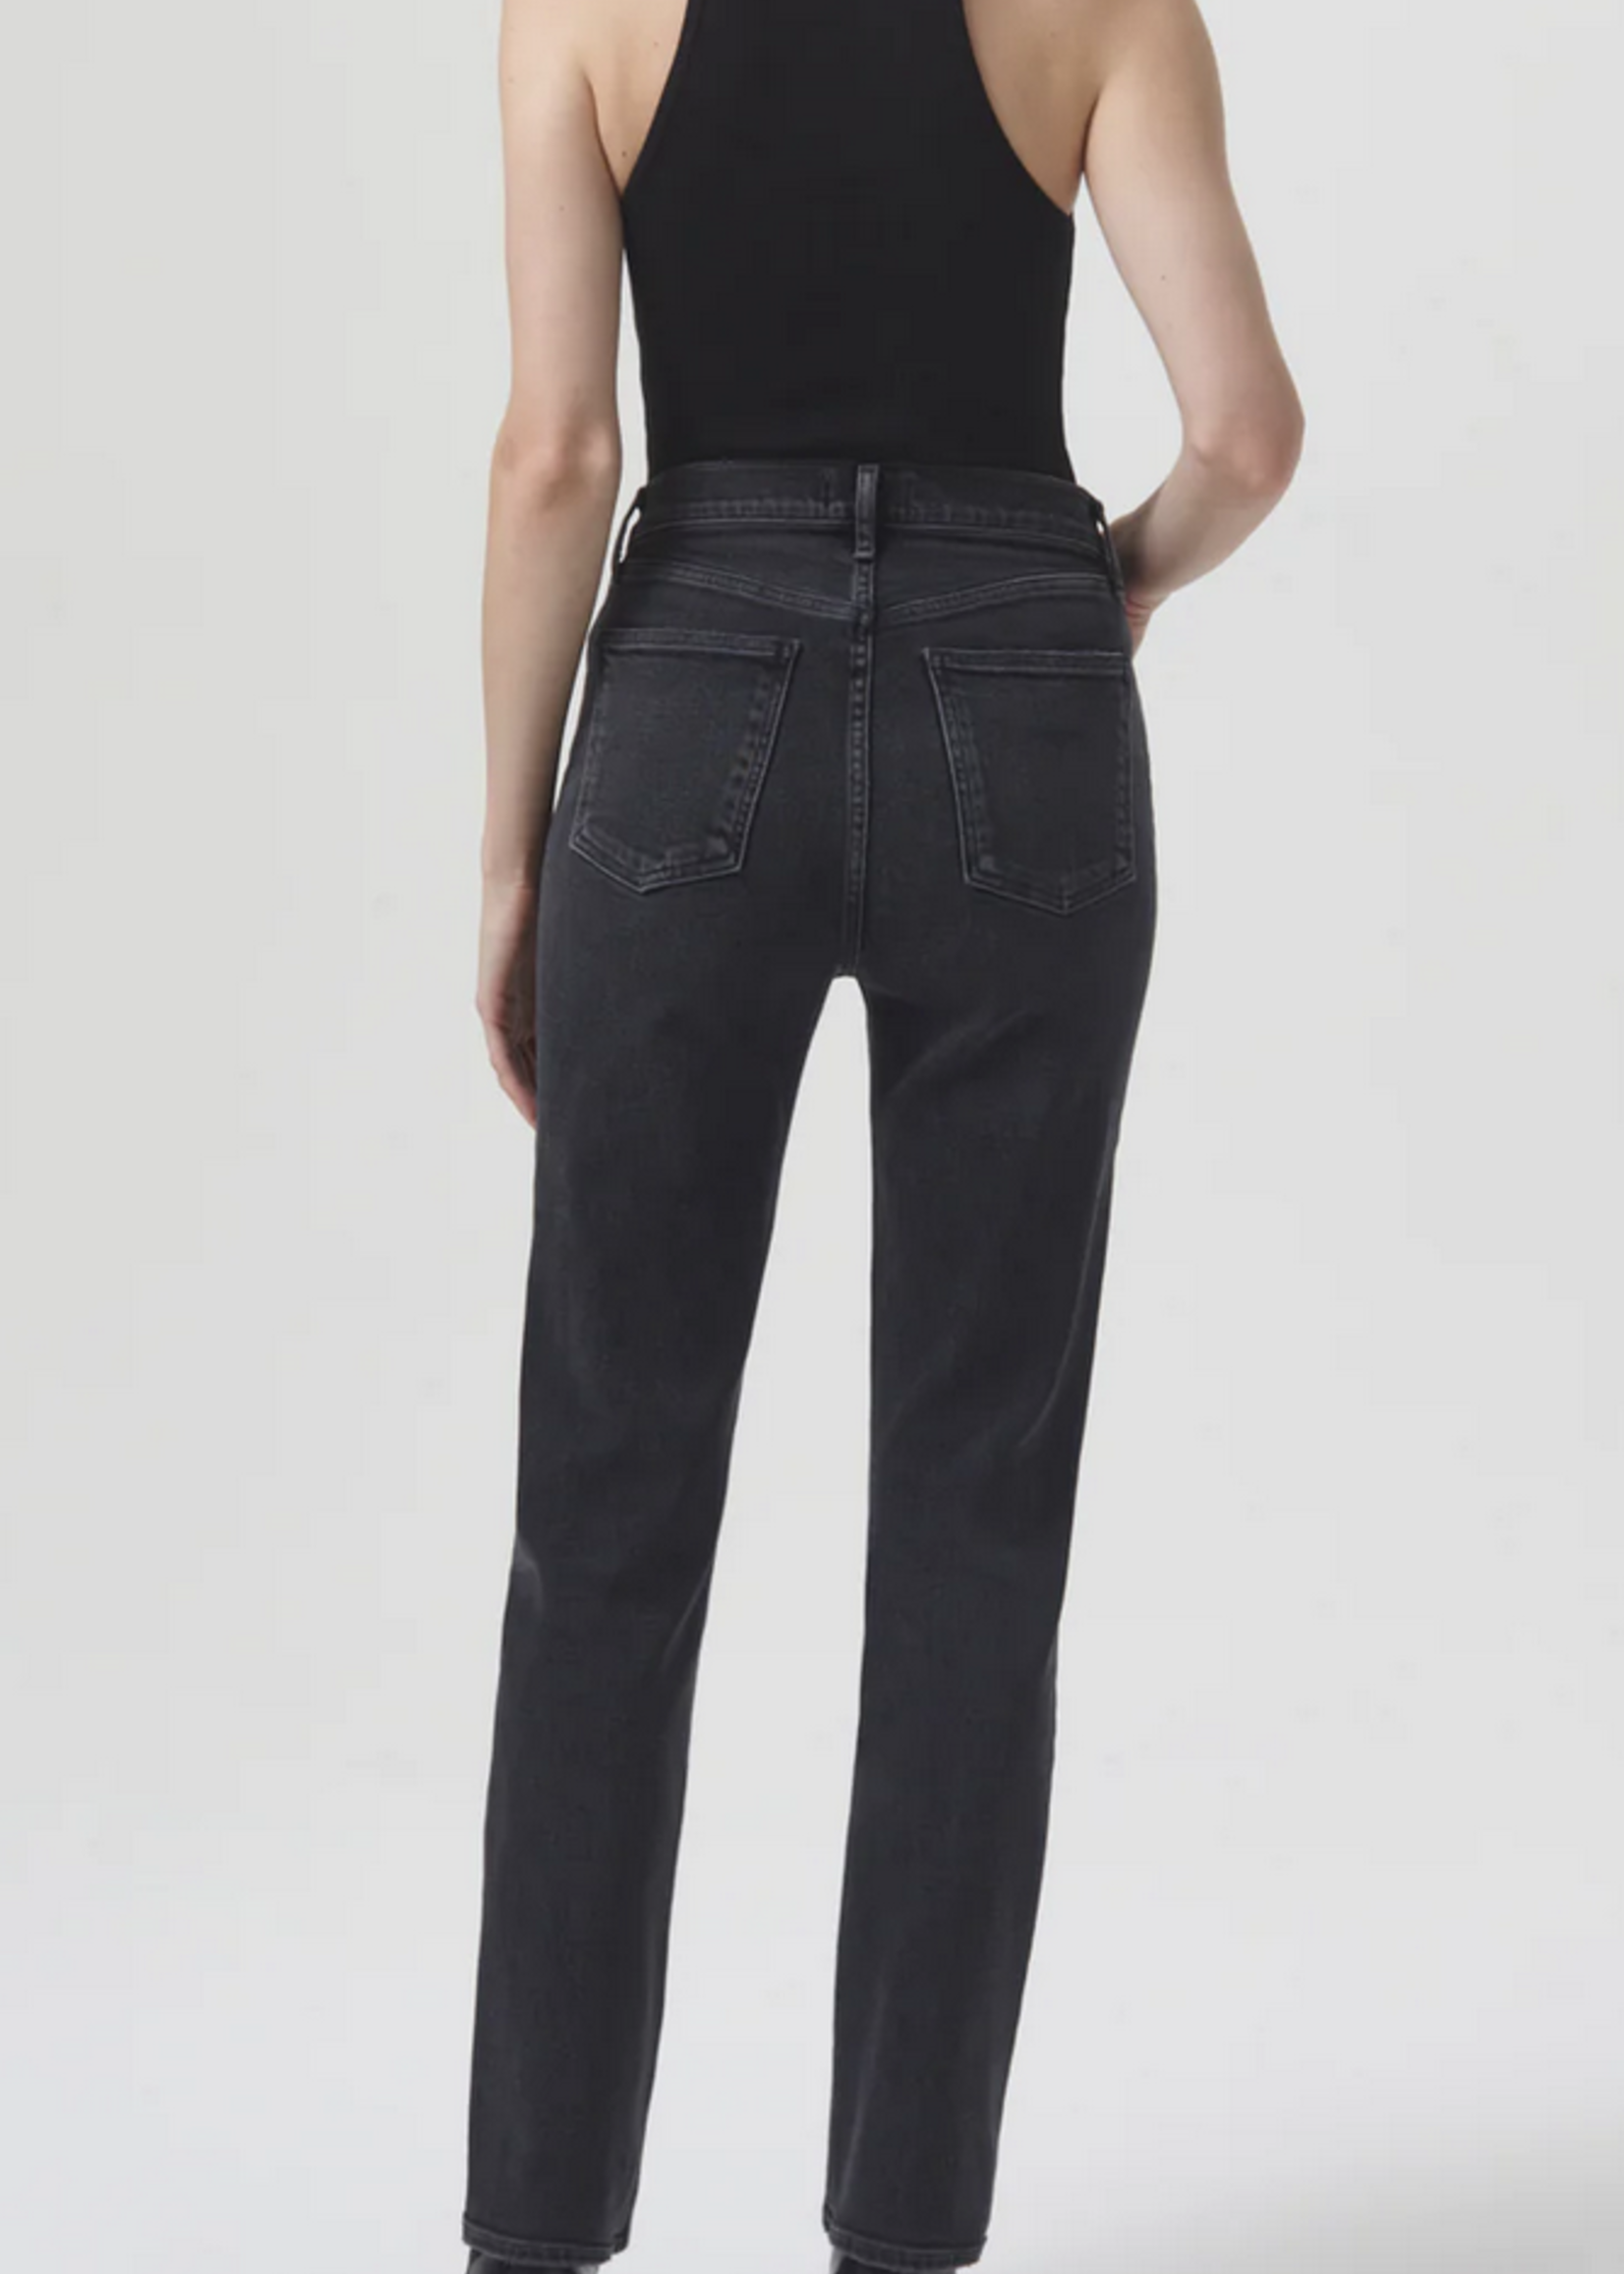 AGOLDE HIGH RISE STOVEPIPE JEAN